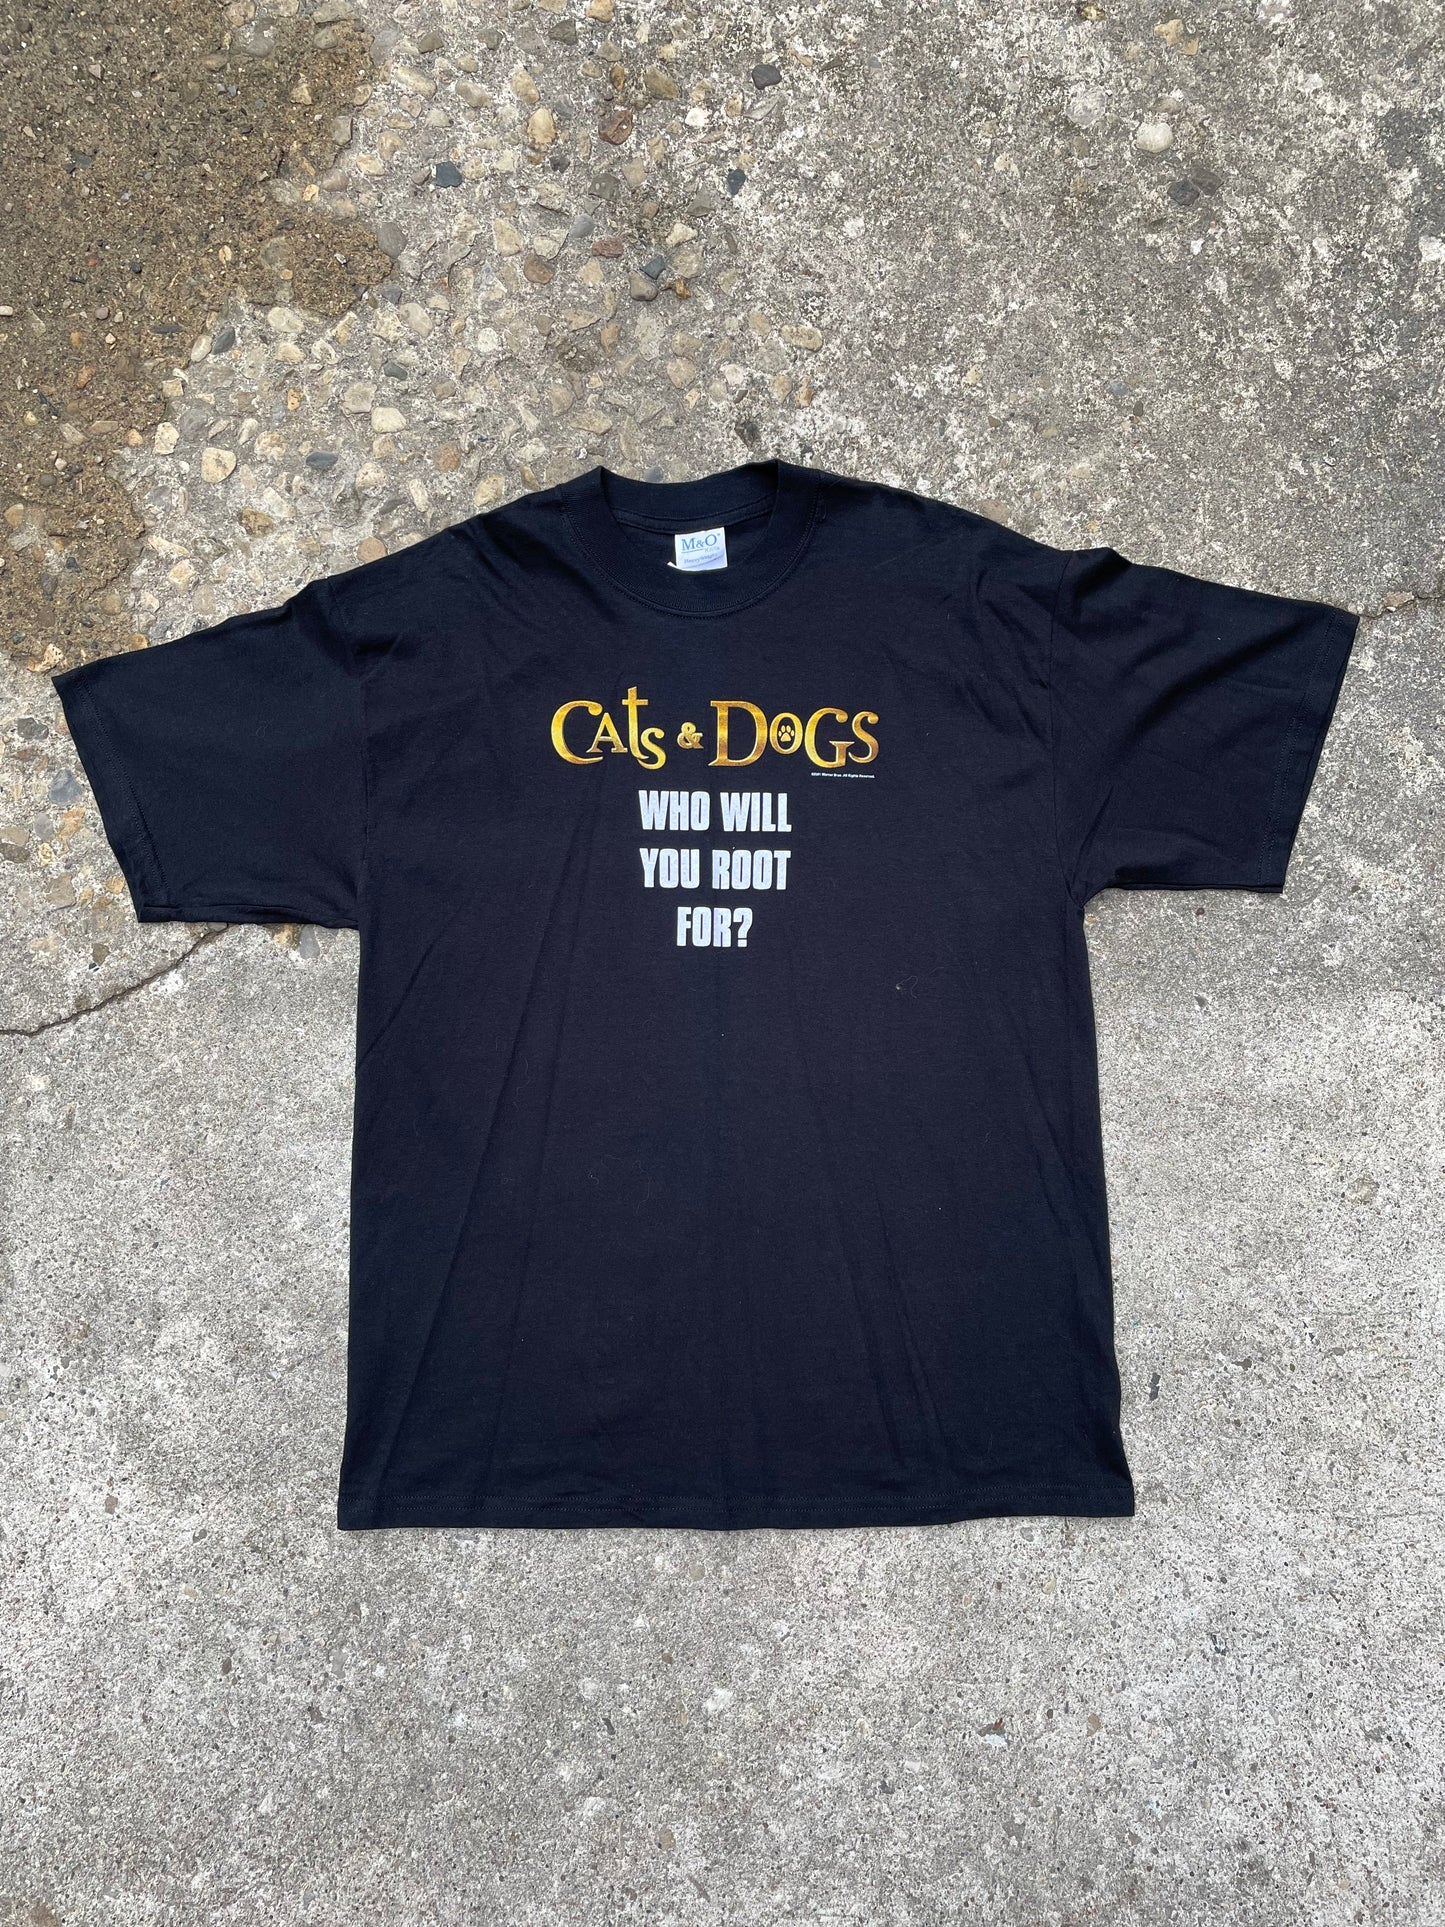 2001 Cats & Dogs Movie Promo T-Shirt - XL